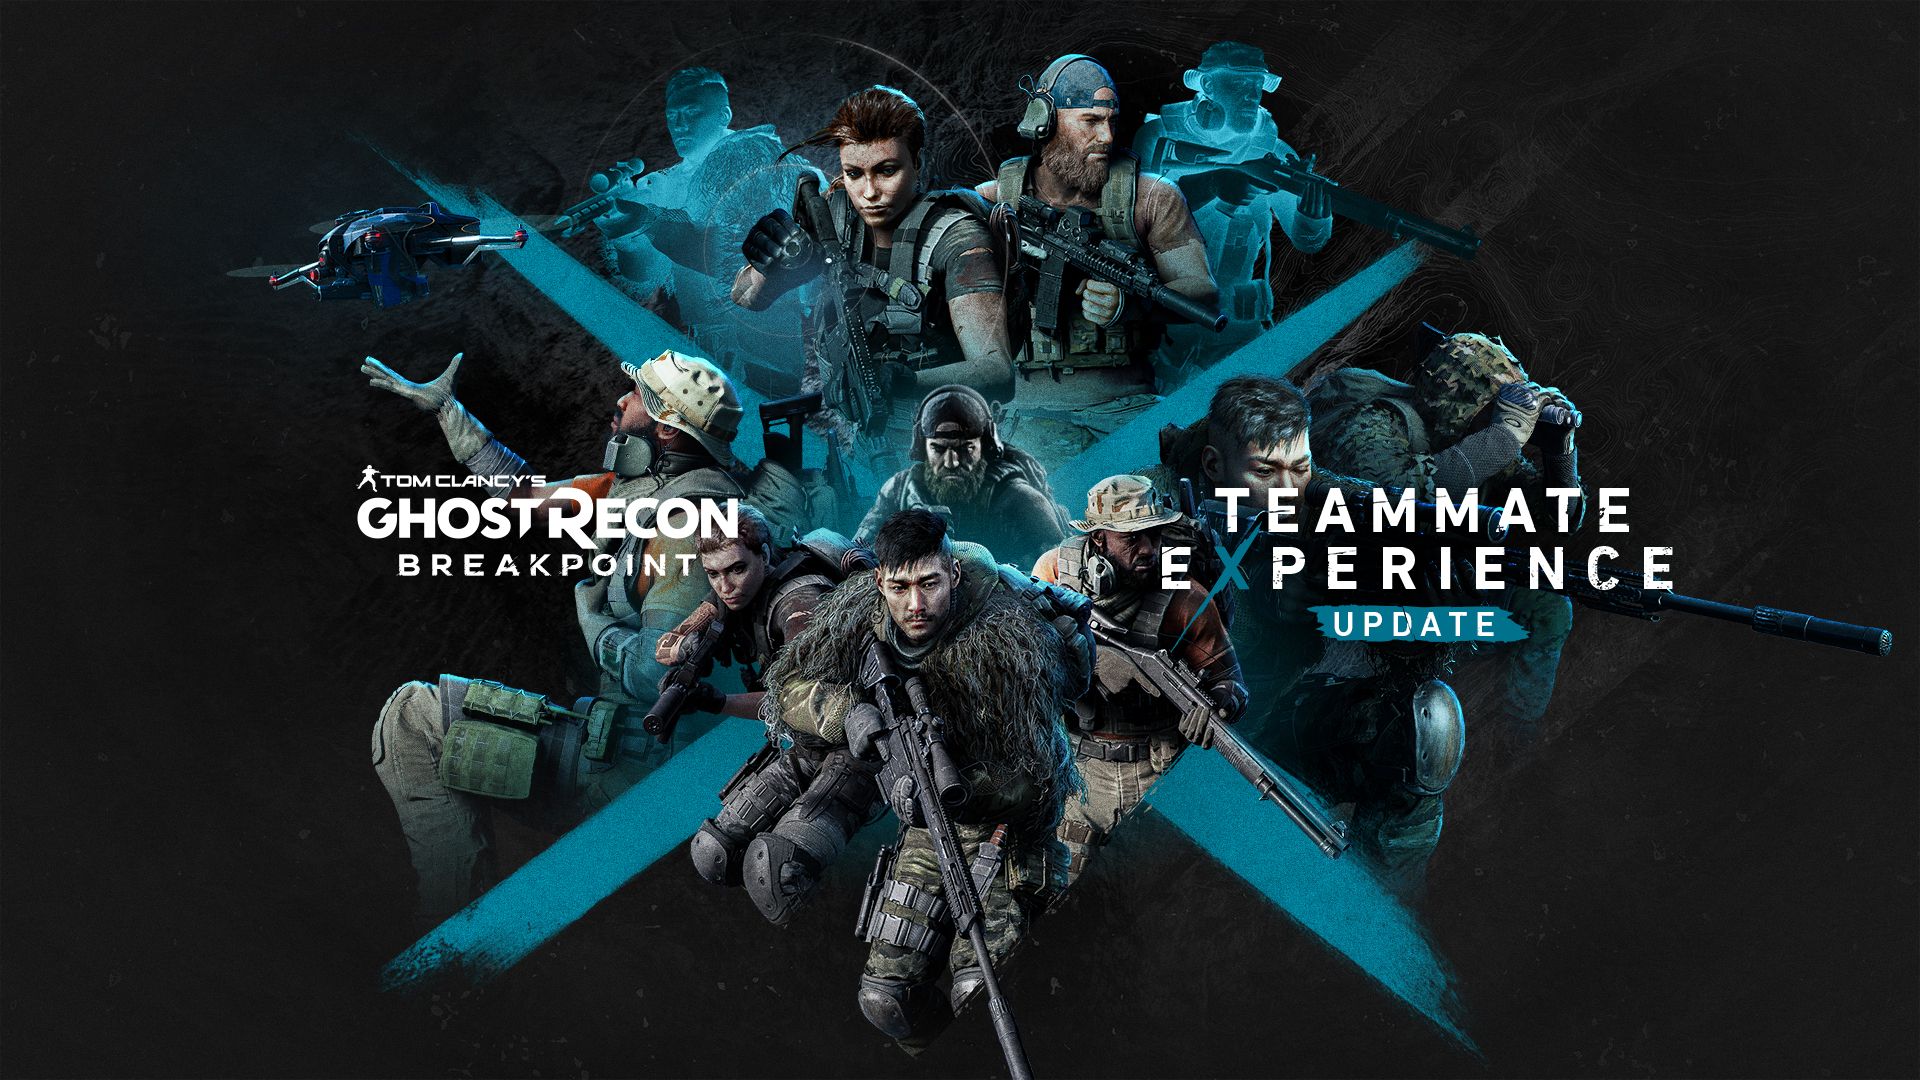 Image for Ghost Recon Breakpoint's all-new AI teammate experience lands next week